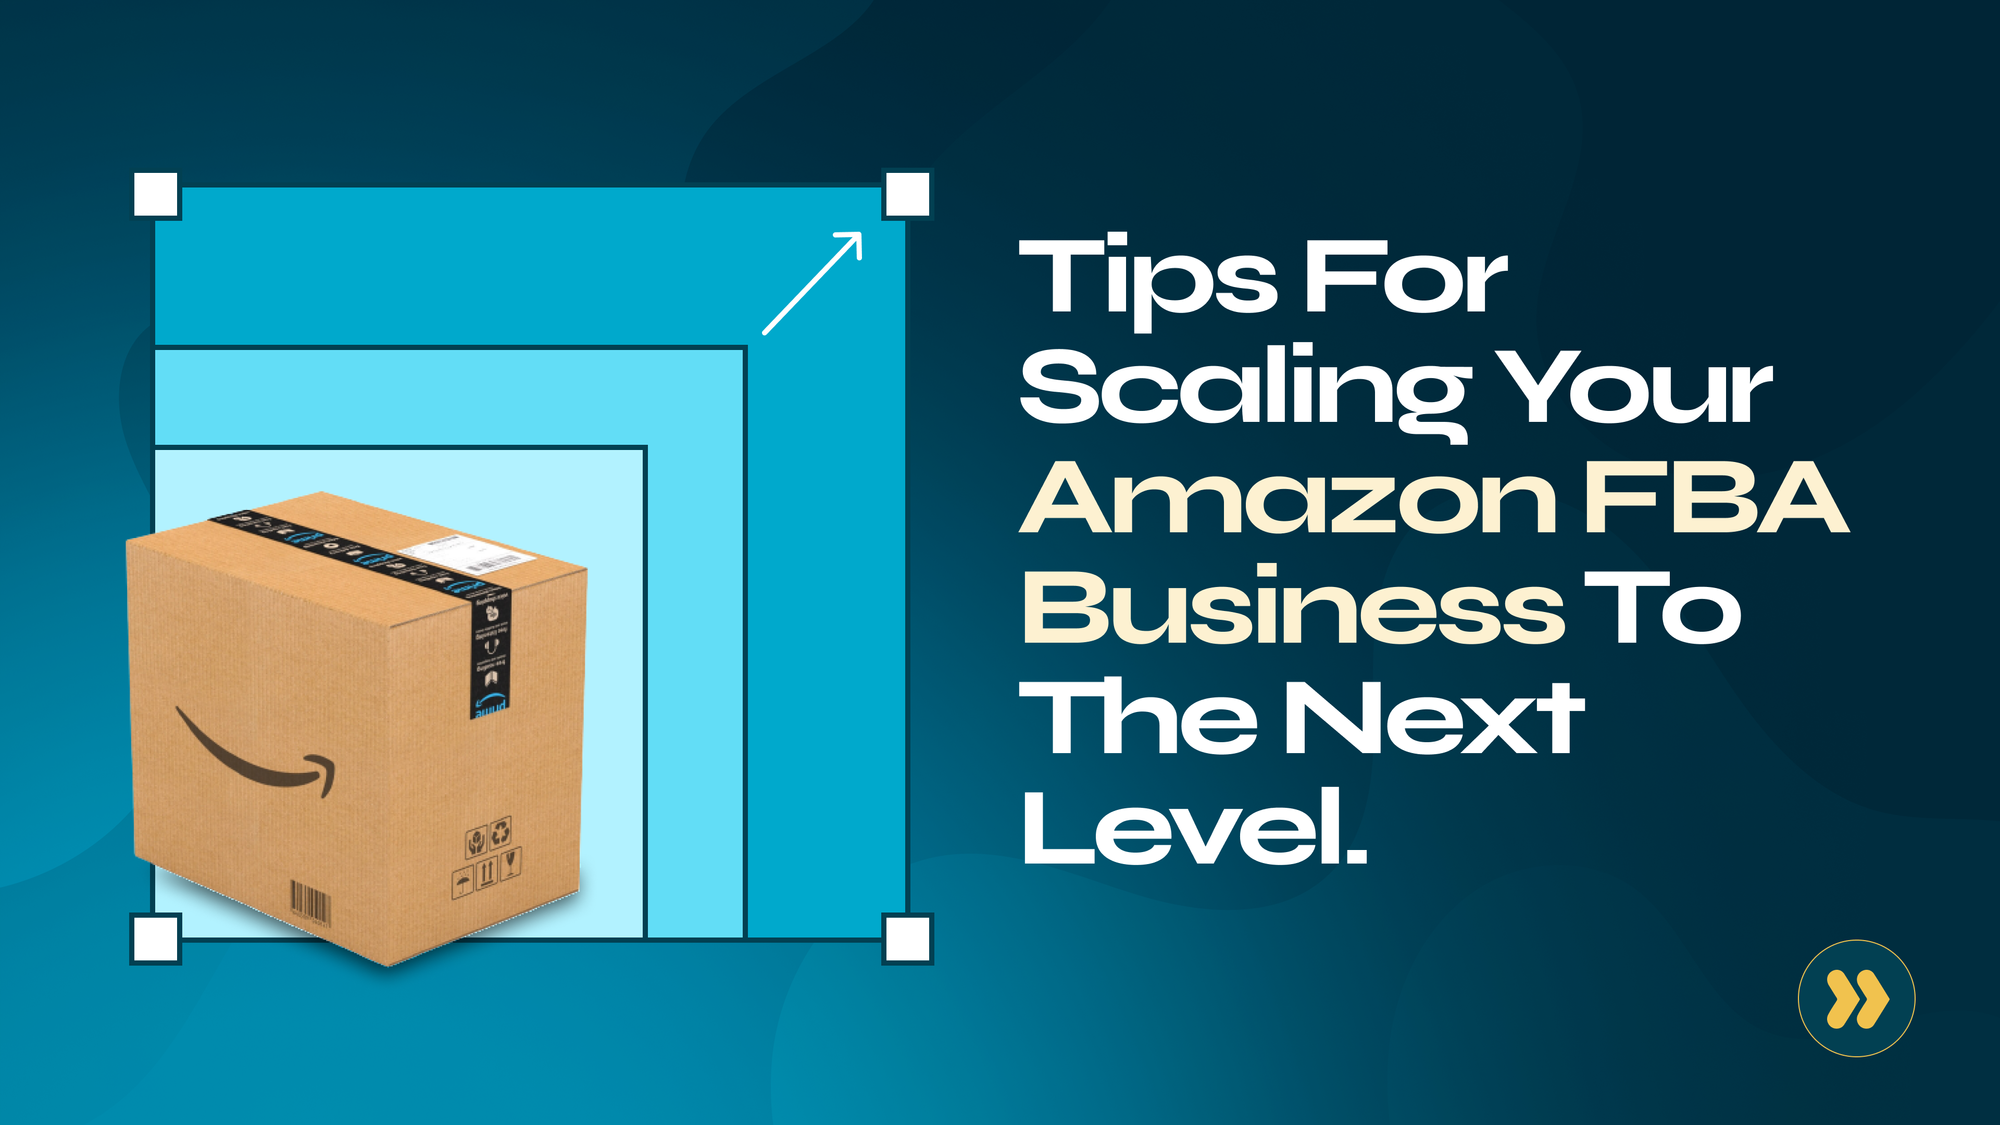 Tips for Scaling Your Amazon FBA Business to the Next Level